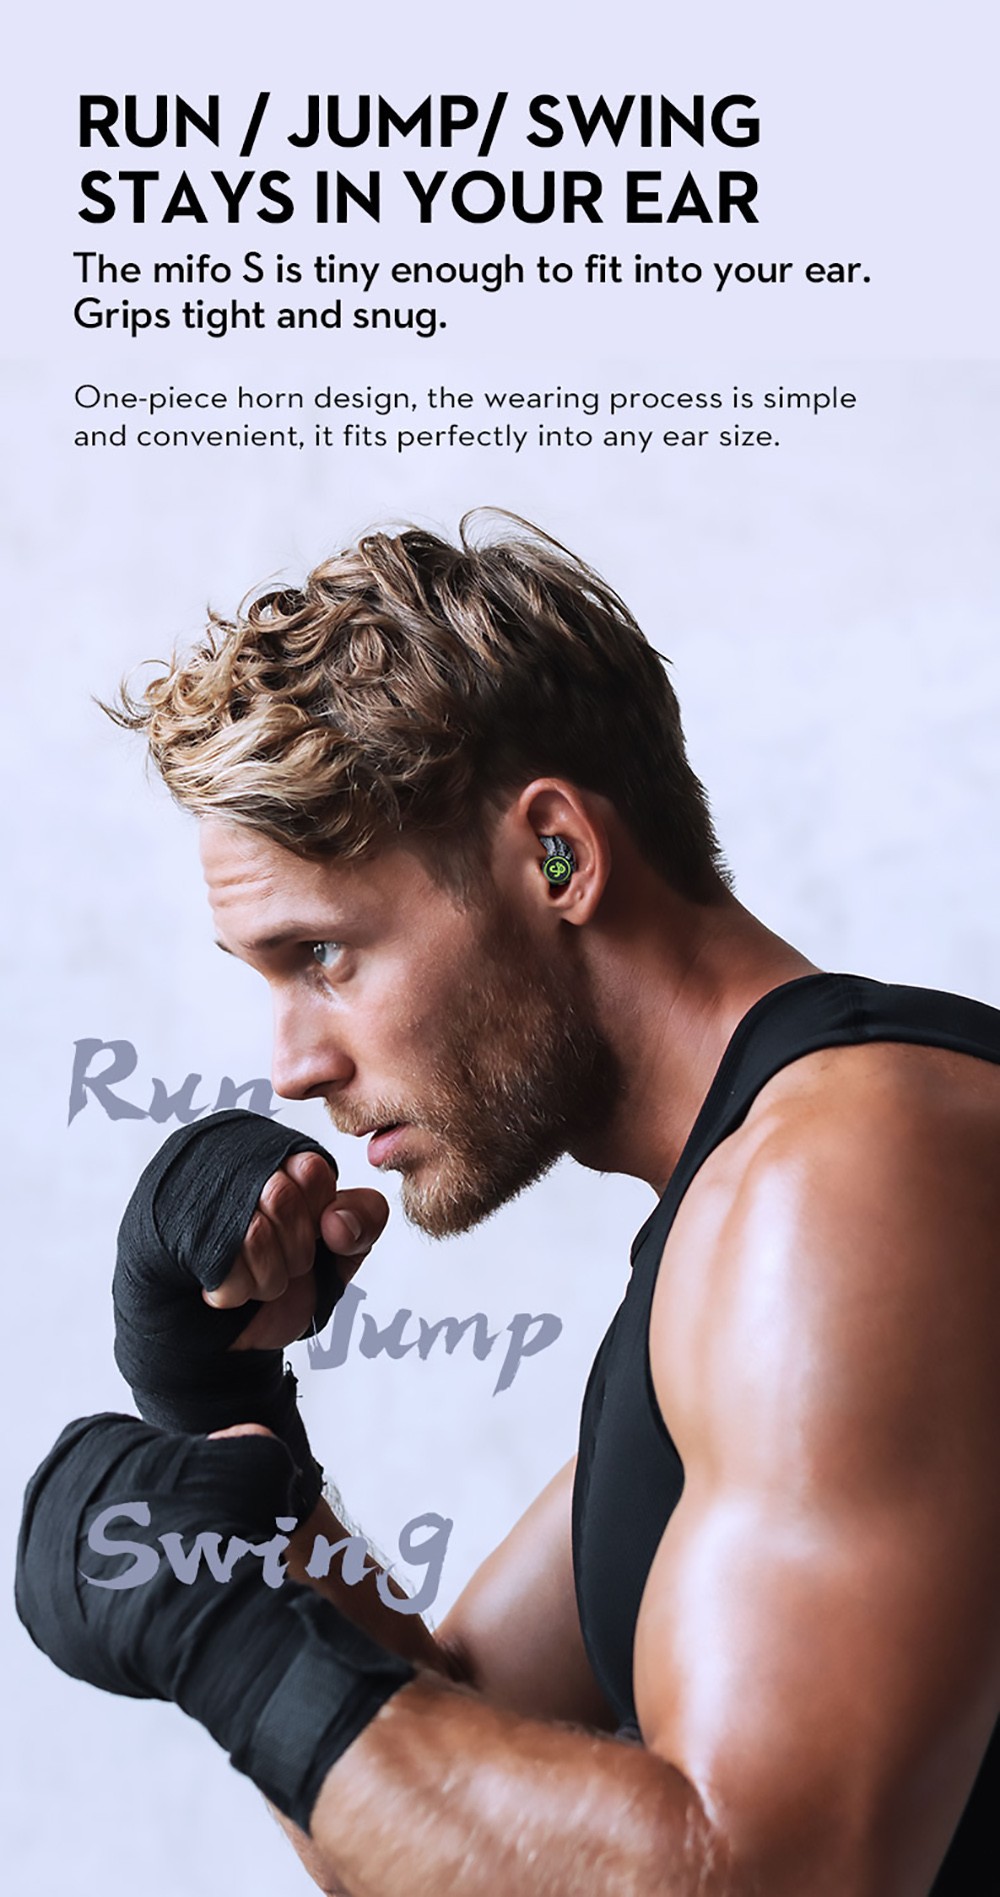 Mifo S Earbuds Active Noise Cancelling True Wireless Bluetooth 5.2 Earphone - Sports Style